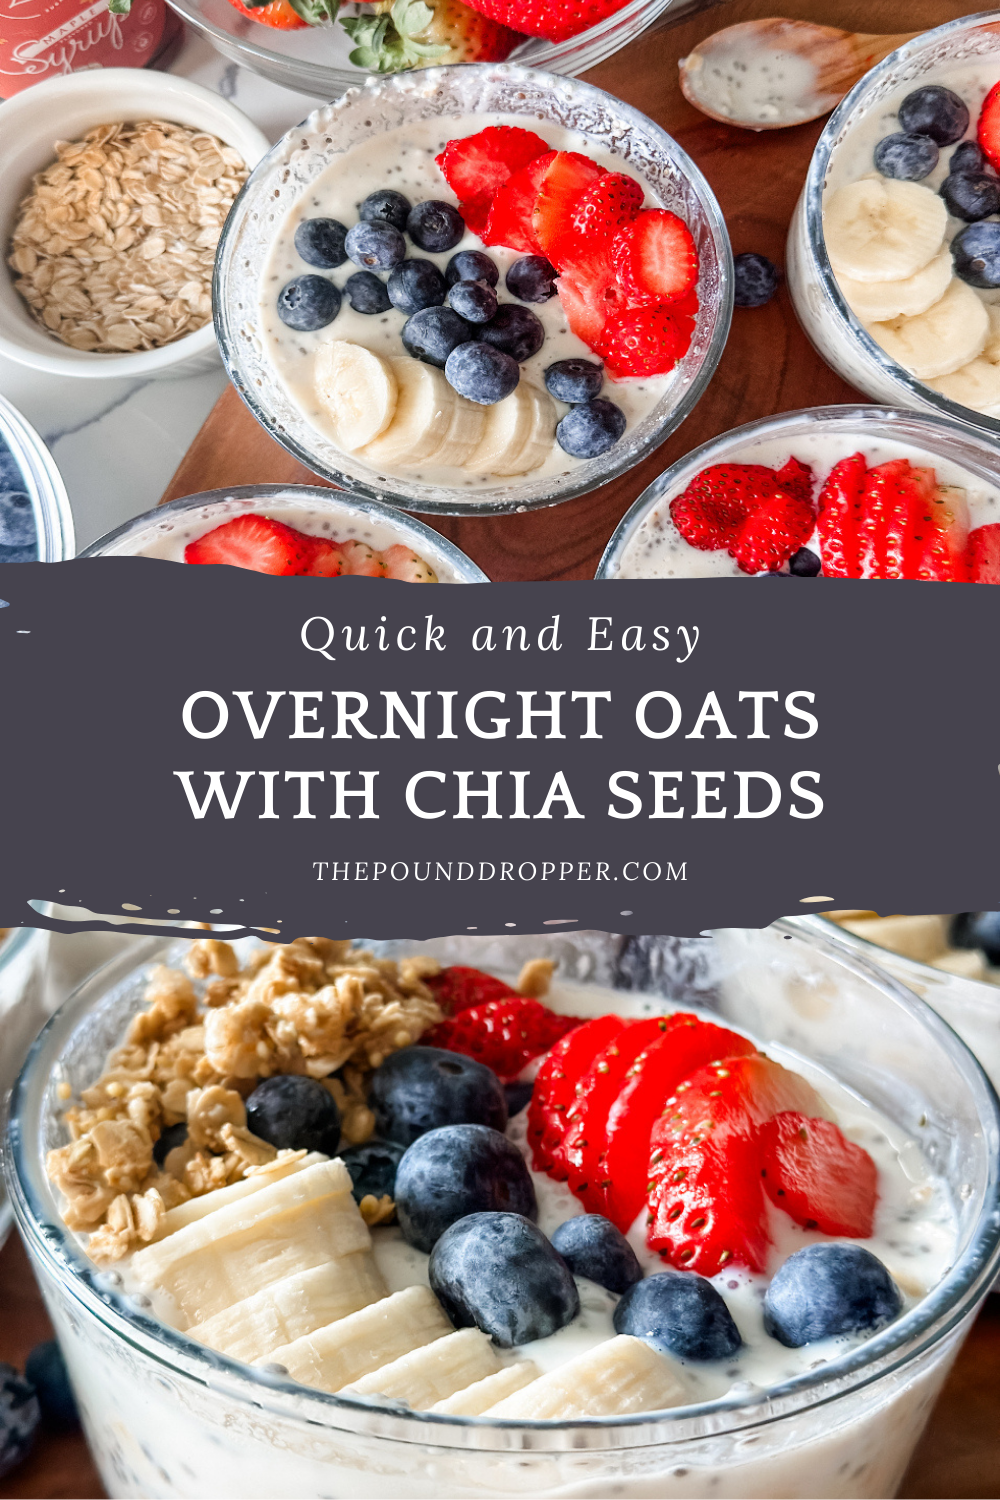 This Quick and Easy Overnight Oats with Chia Seeds recipe makes for a simple healthy breakfast for those busy mornings. These are versatile and can be customized by adding your favorite add in's and fruit toppings! Takes less than five minutes of prep time! via @pounddropper